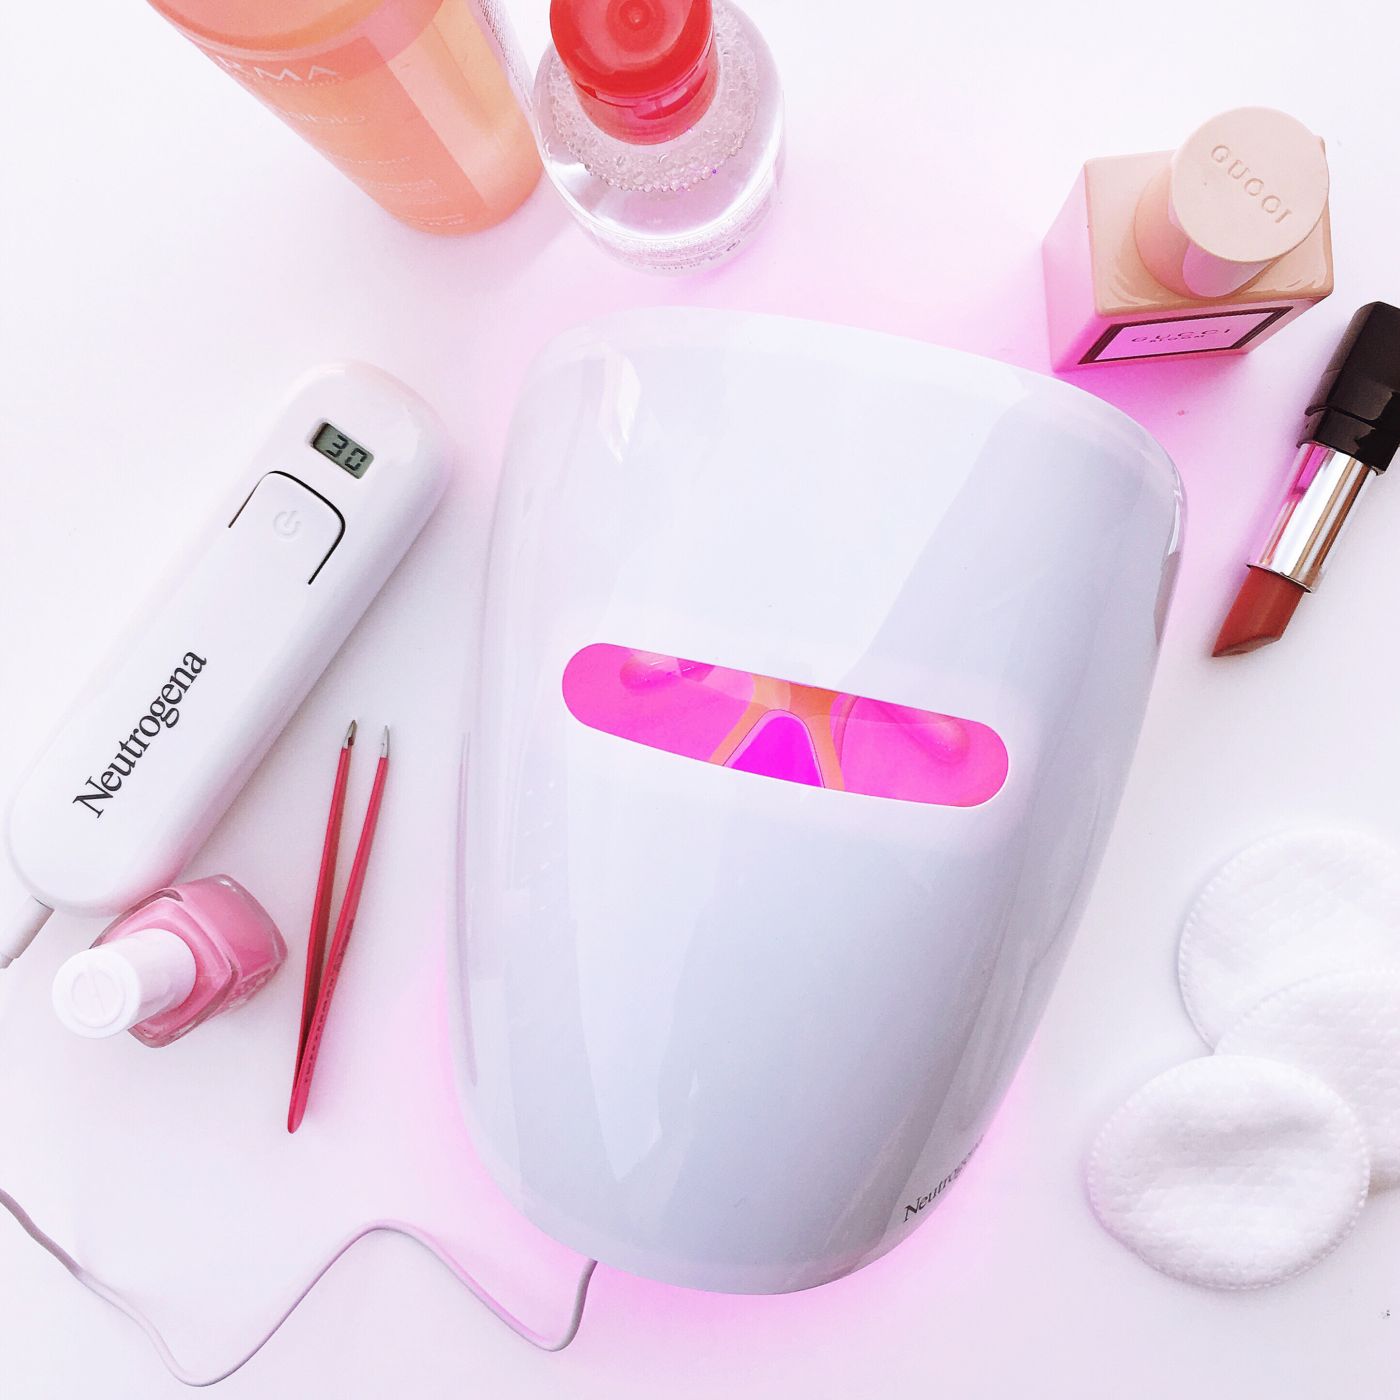 High Tech Beauty Tools To Invest In Now